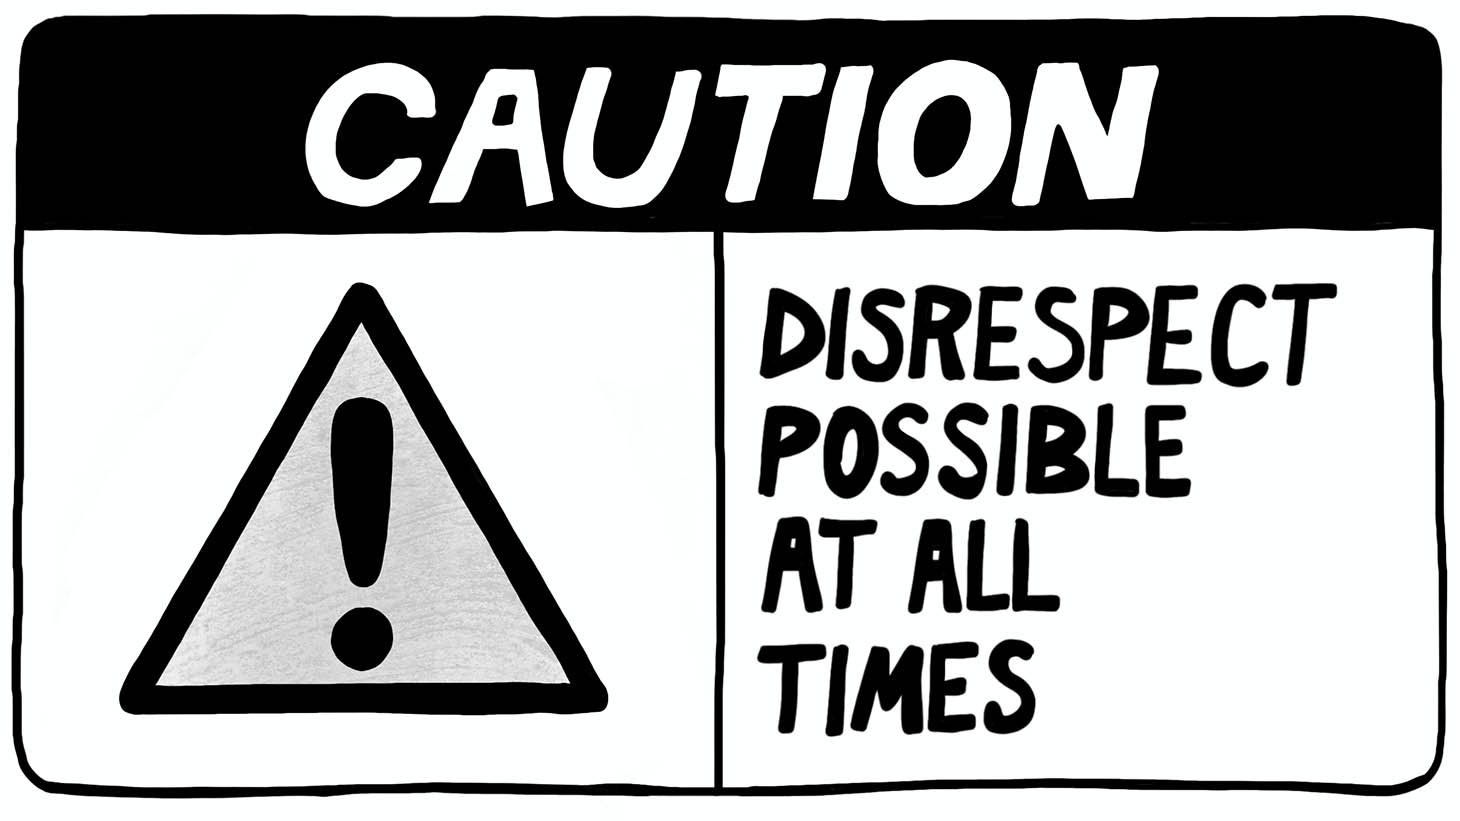 Caution sign - Disrespect possible at all times (illustration)